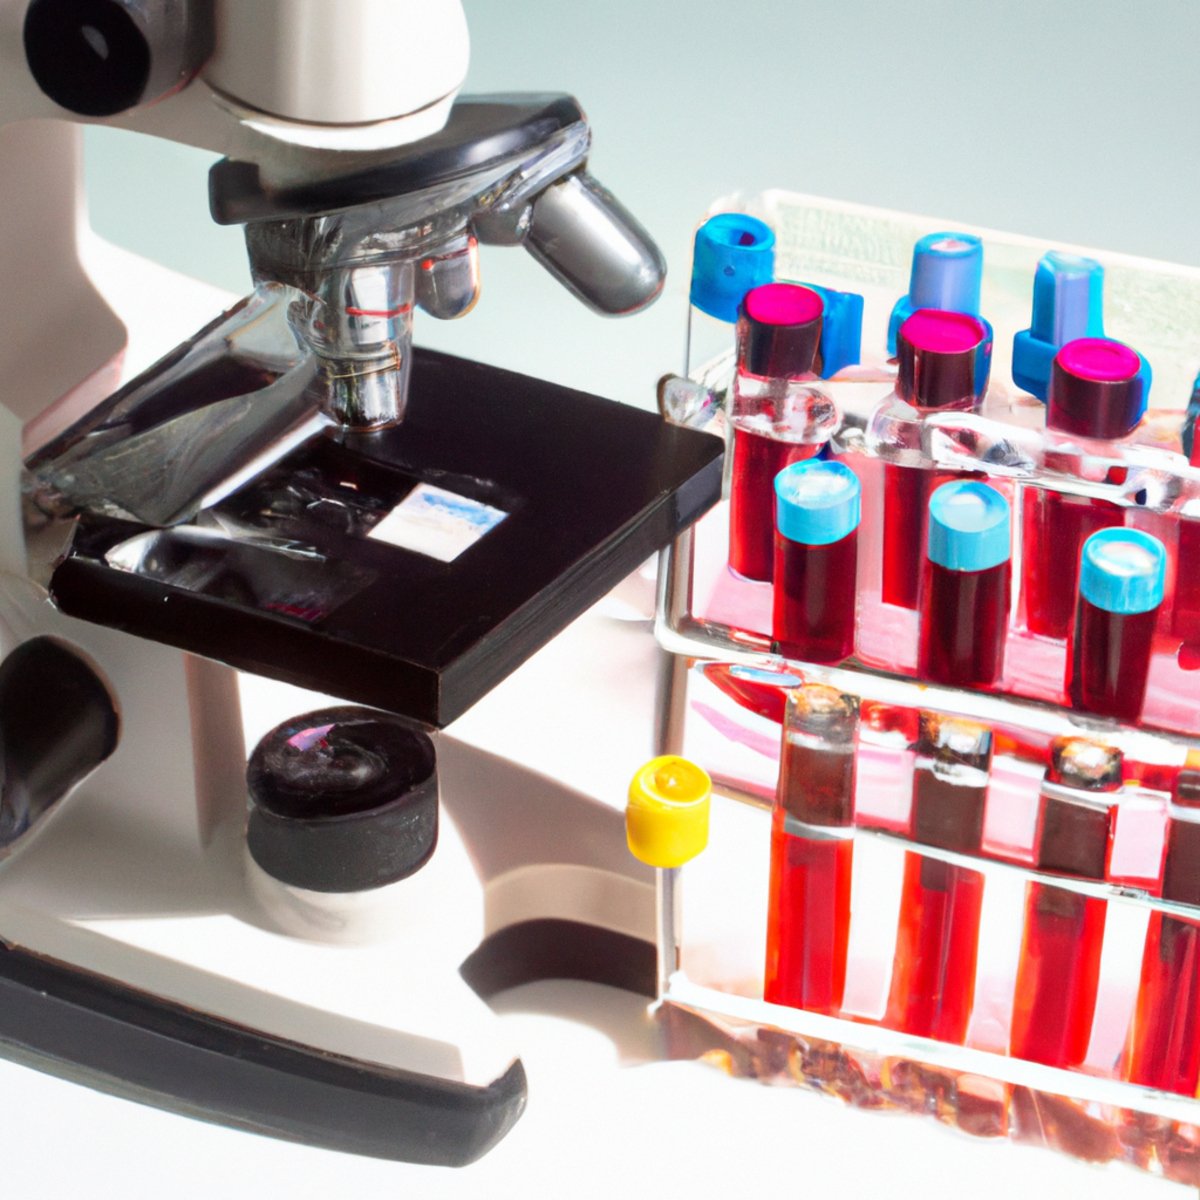 Close-up of laboratory microscope examining blood samples, surrounded by scientific equipment, emphasizing scientific research.